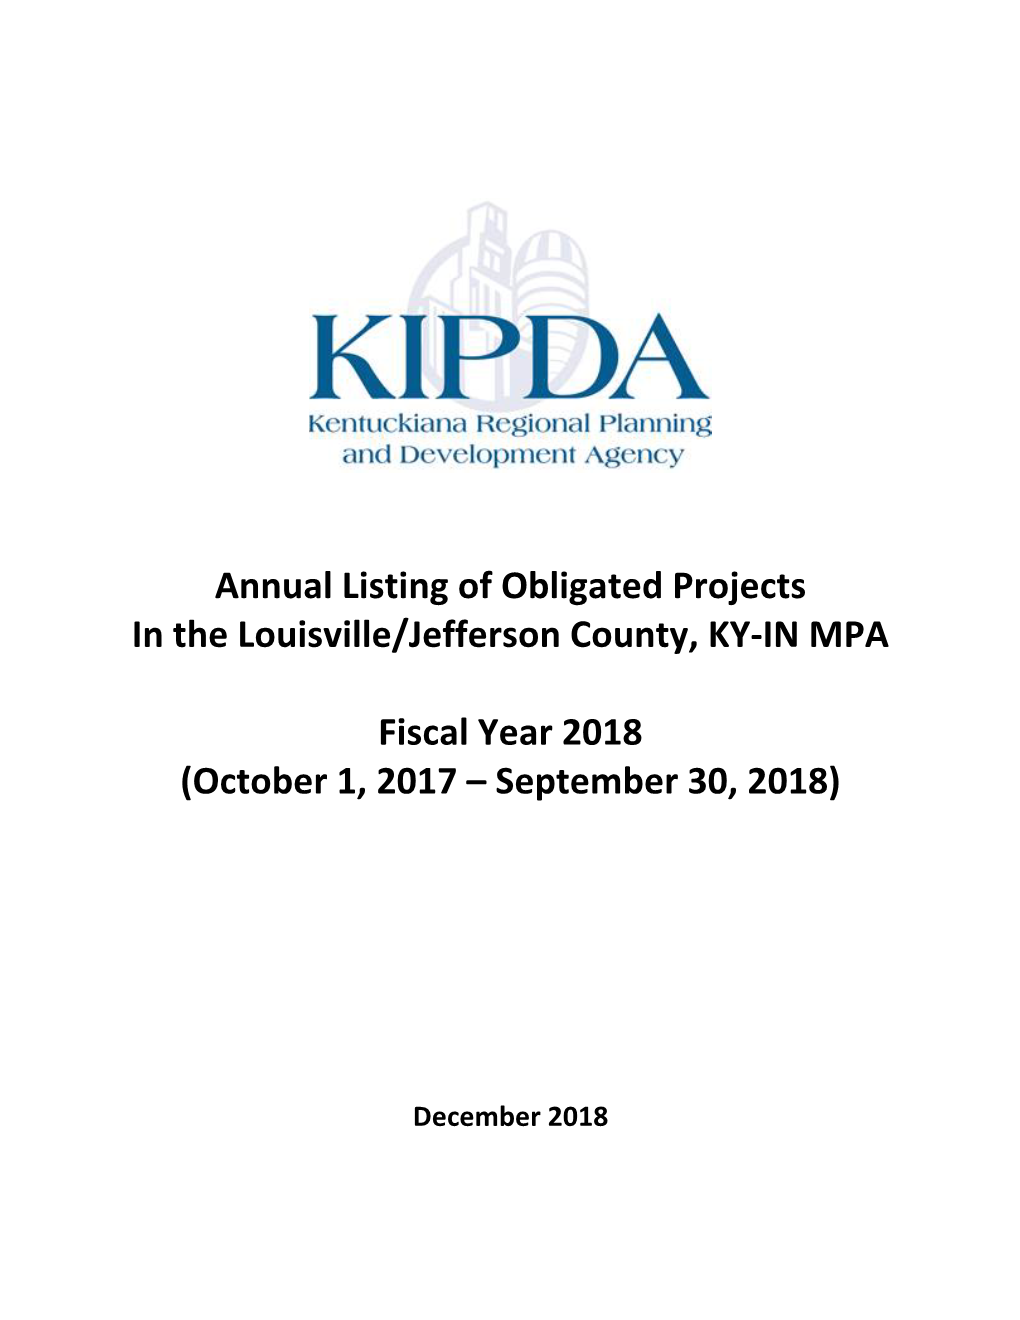 Annual Listing of Obligated Projects in the Louisville/Jefferson County, KY-IN MPA